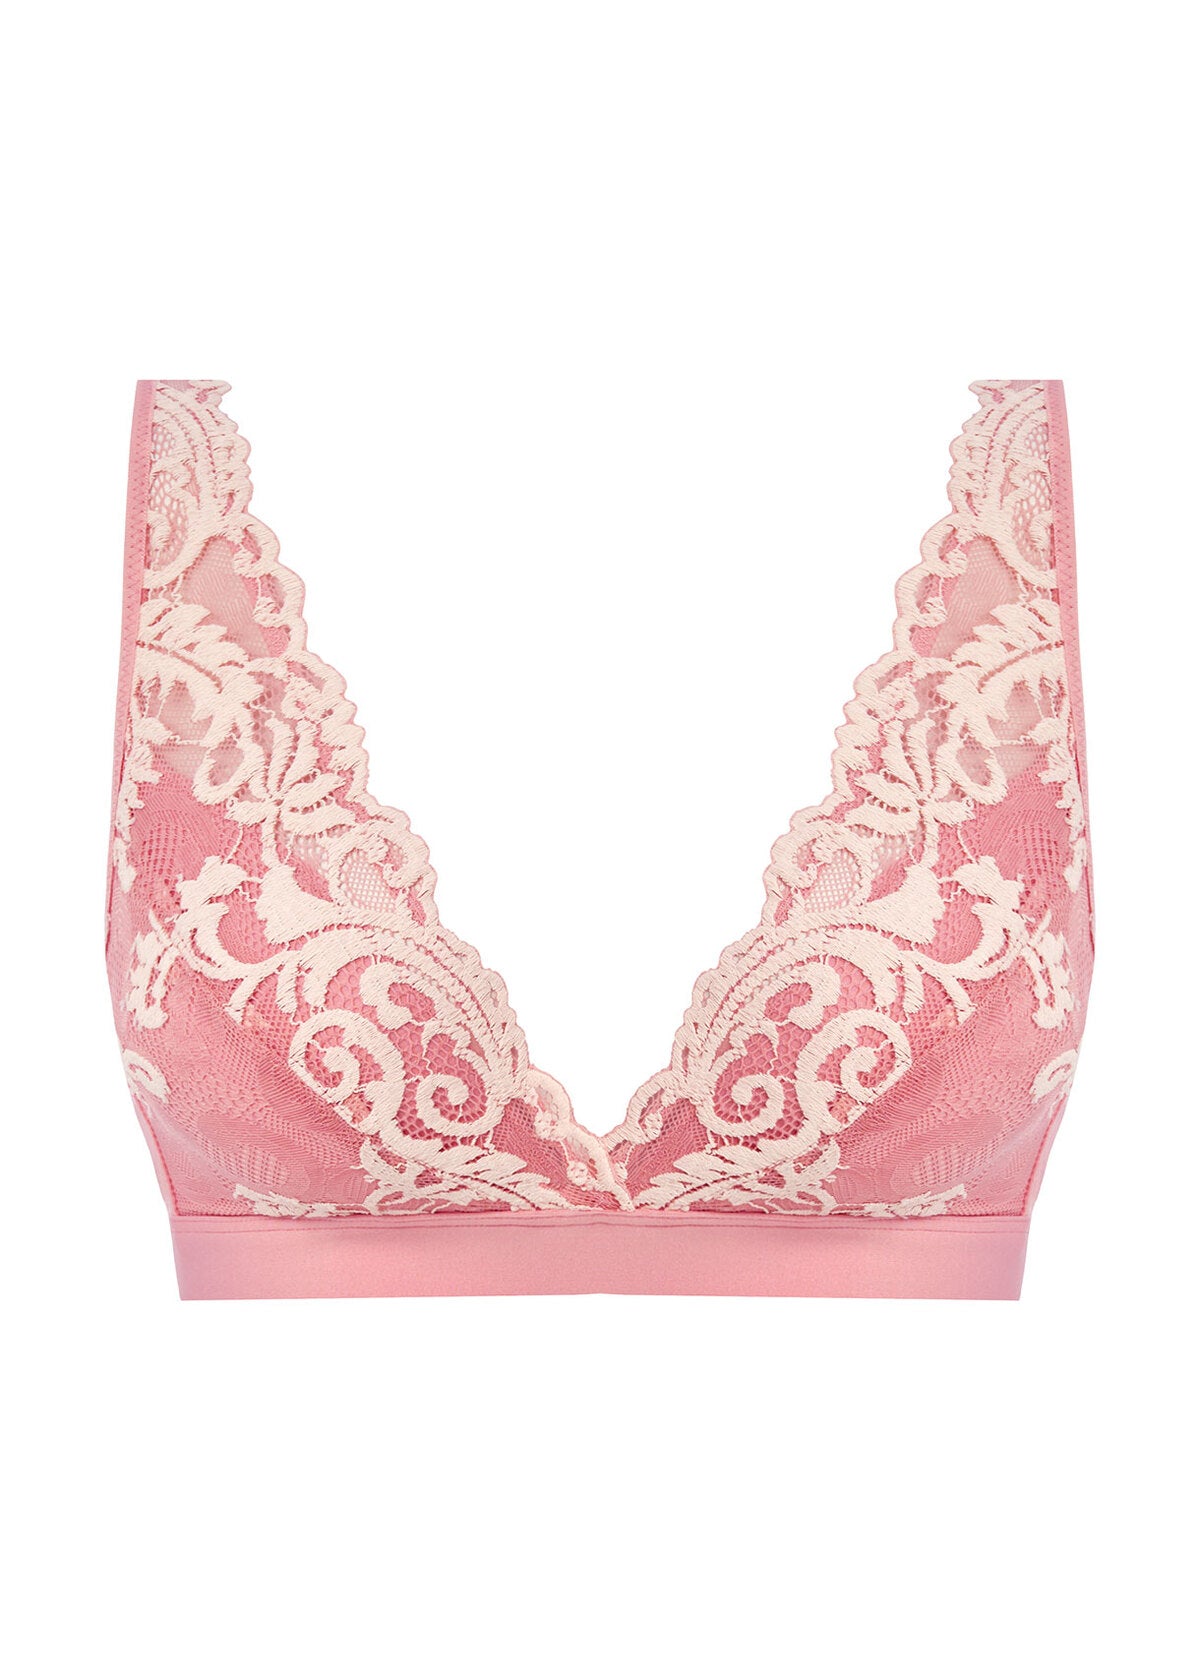 Wacoal Instant Icon Bralette - Bridal Rose / Crystal Pink